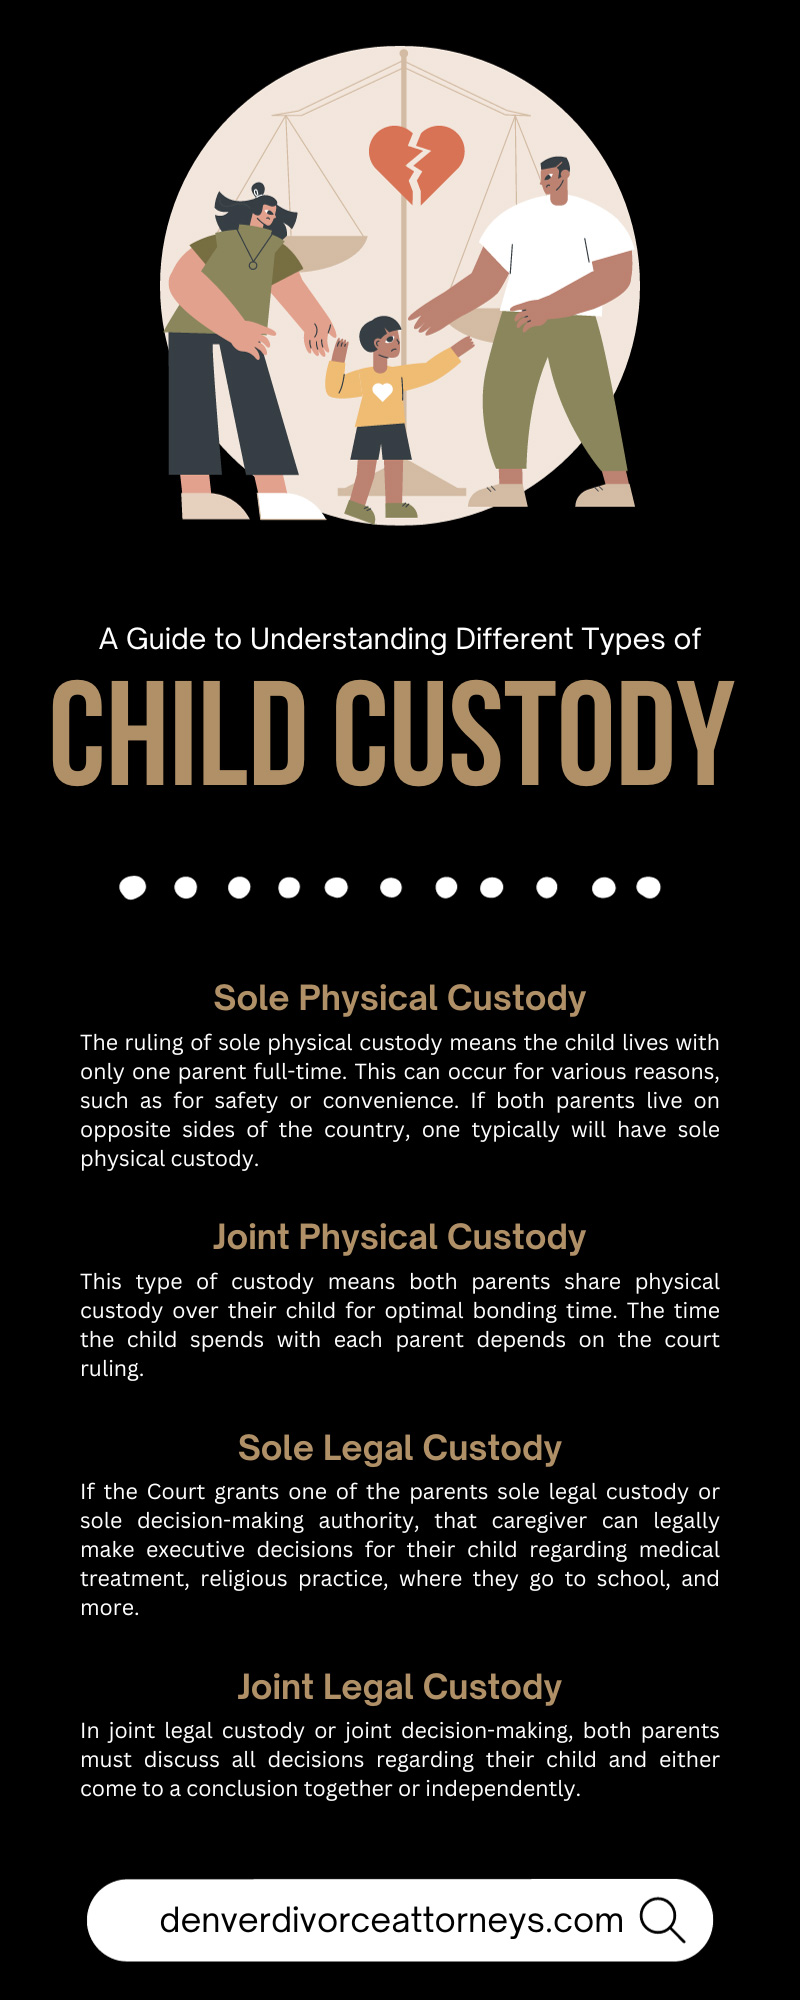 A Guide to Understanding Different Types of Child Custody